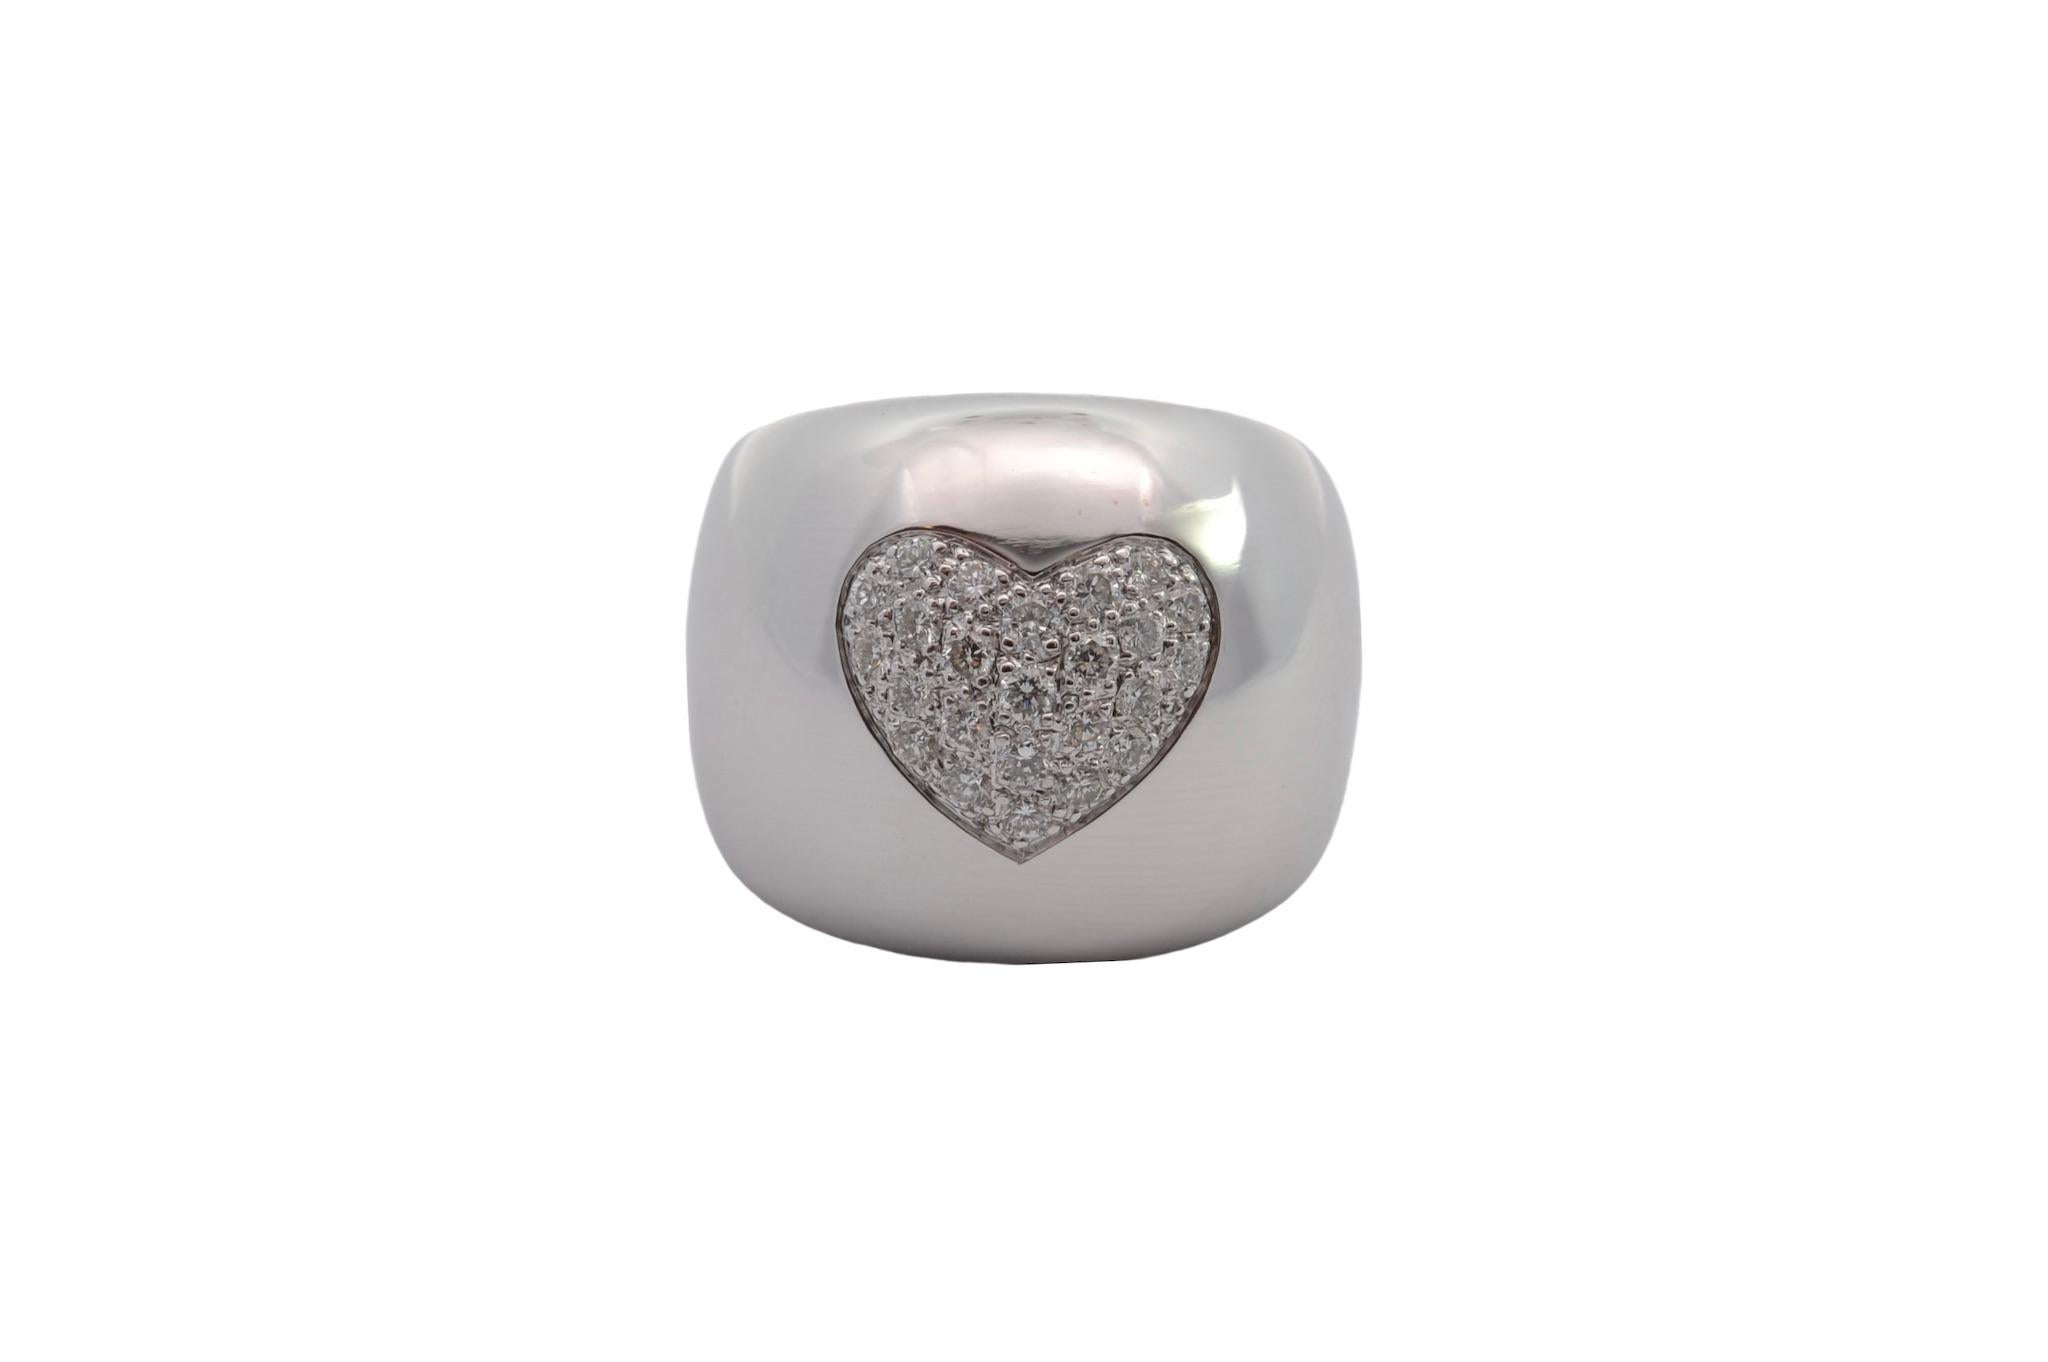 Stones: 24 diamonds, weight: 0.30ct
Material: 18k white gold
Dimensions: 1.8cm wide
Weight: 12.1g
Period: Recent
Size: 54 (free sizing)
Certificate
Ref. : 25070dv